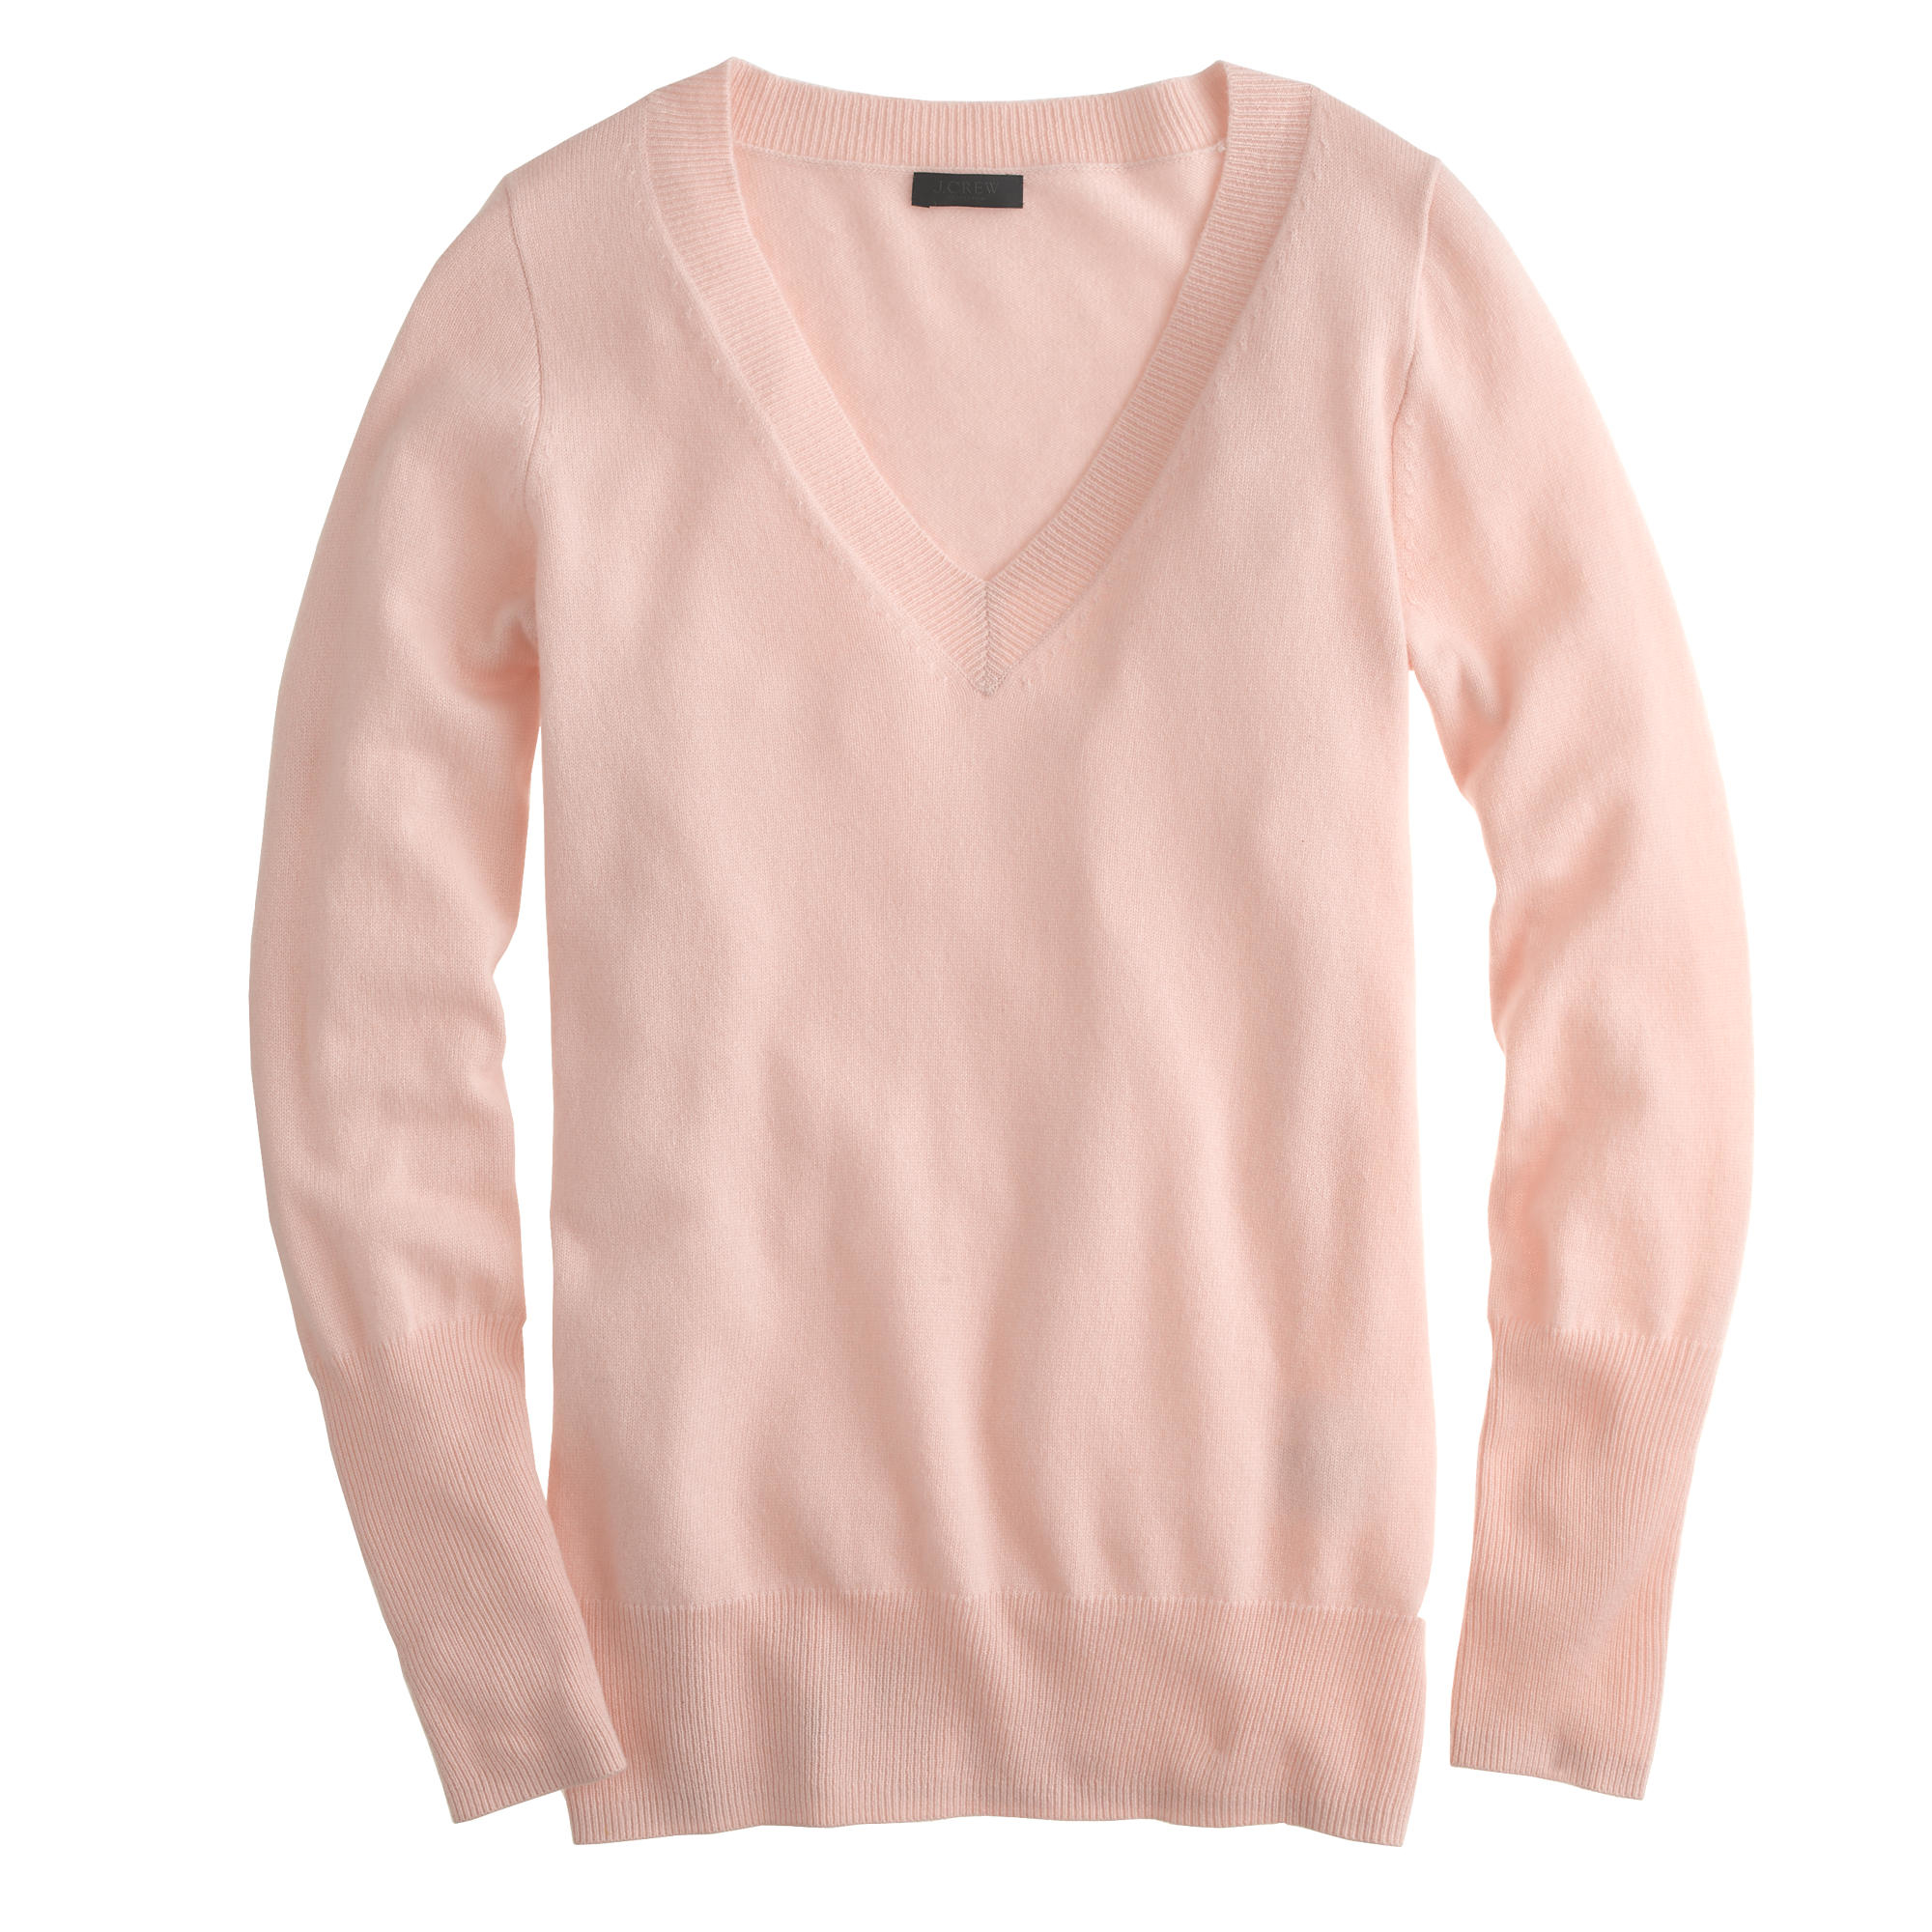 J.Crew Italian Cashmere V-neck Sweater in Pink | Lyst